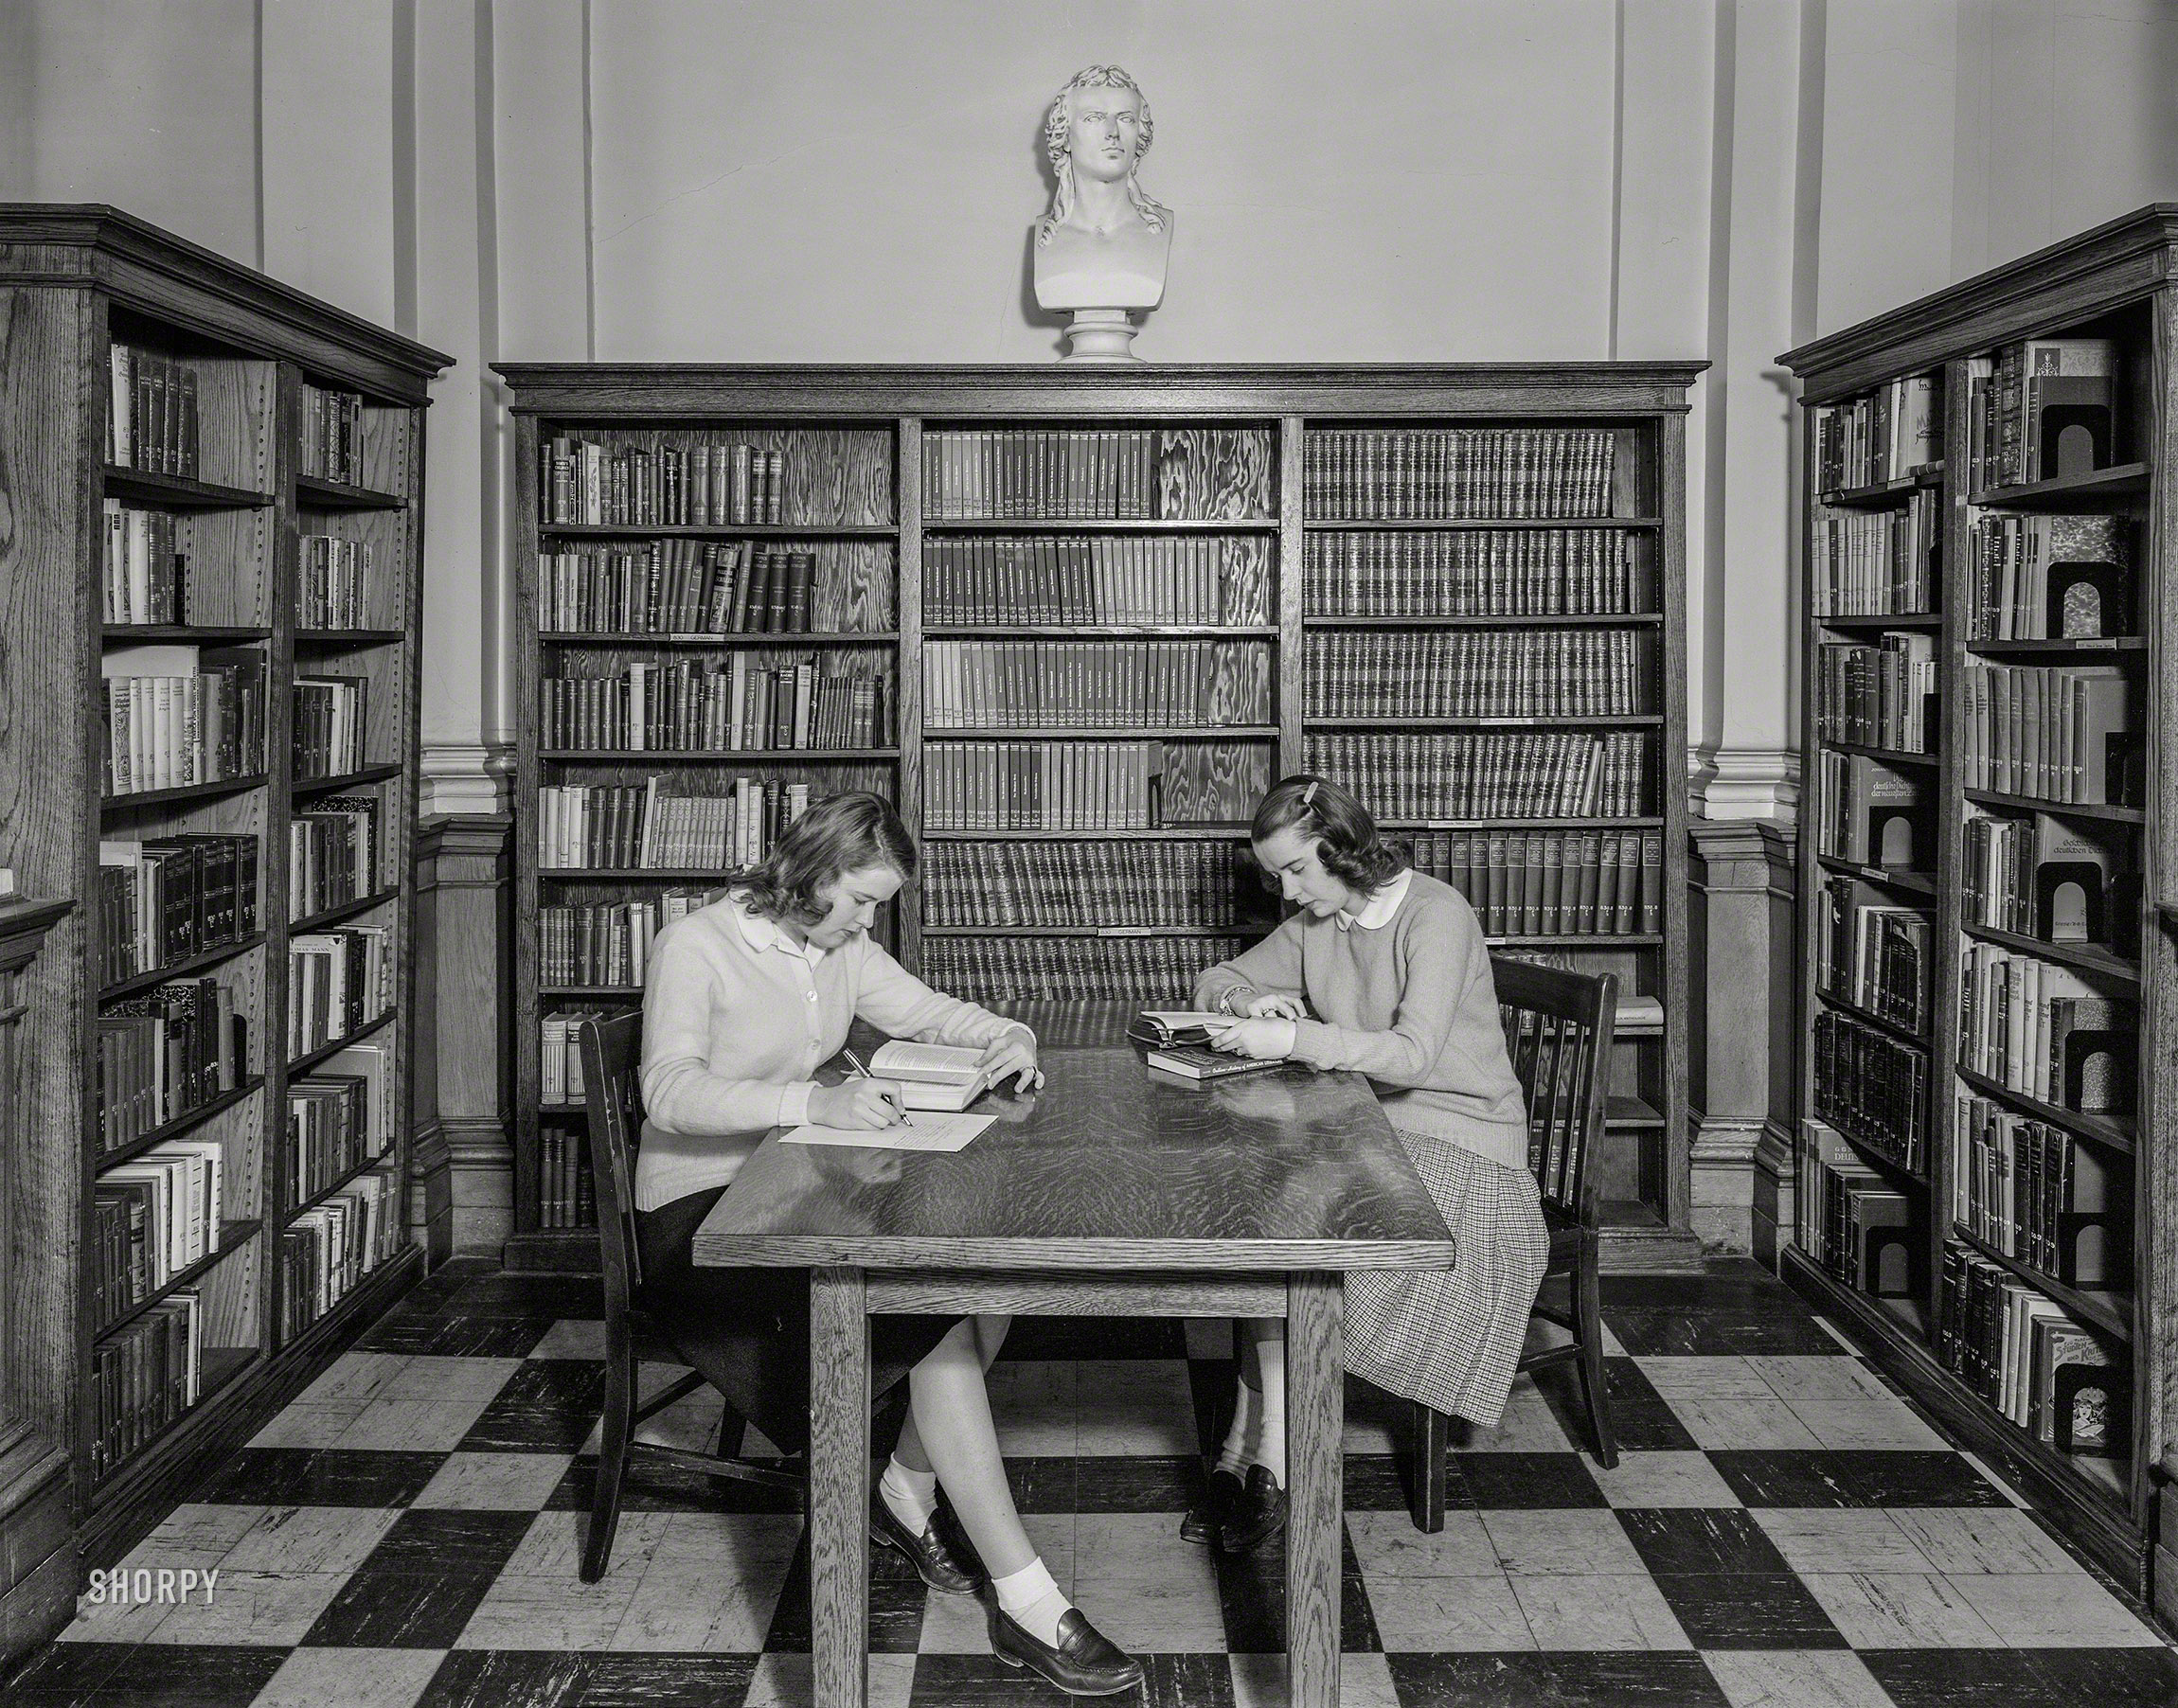 Washington, D.C., circa 1948. "Trinity College. Small alcove in library on campus." 8x10 inch acetate negative by Theodor Horydczak. View full size.